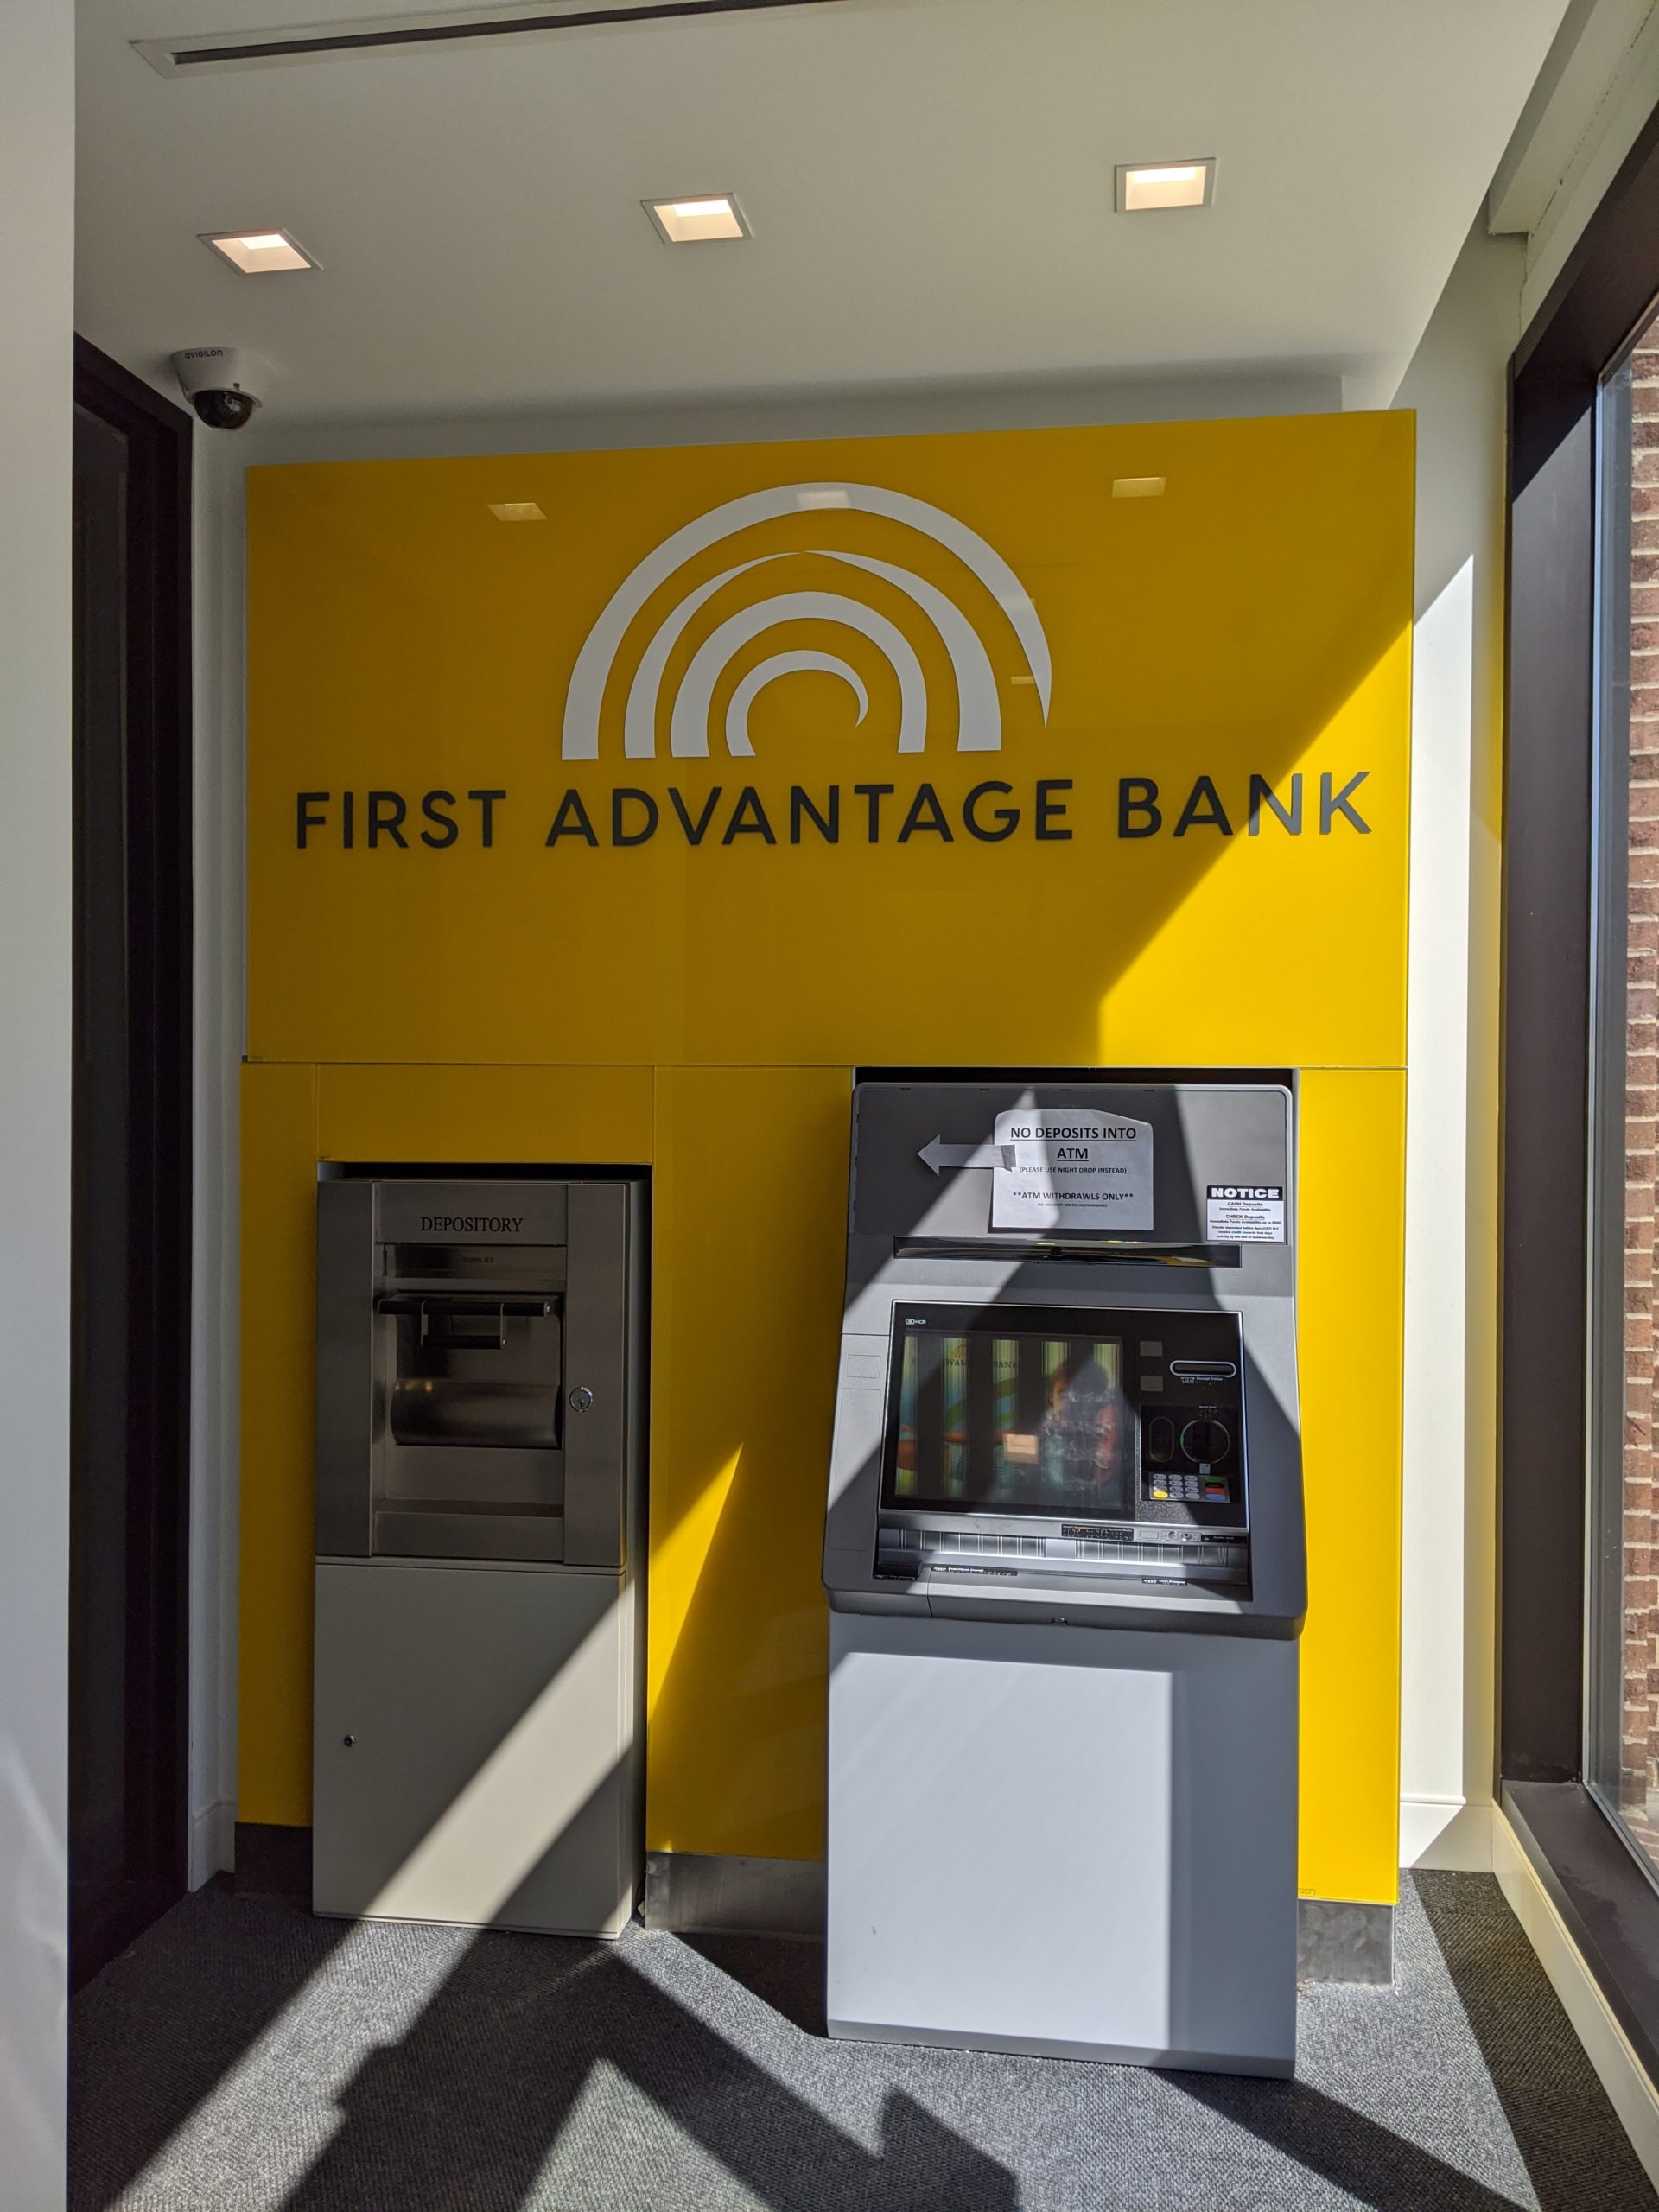 The Original Design for First Advantage Bank ATMs 